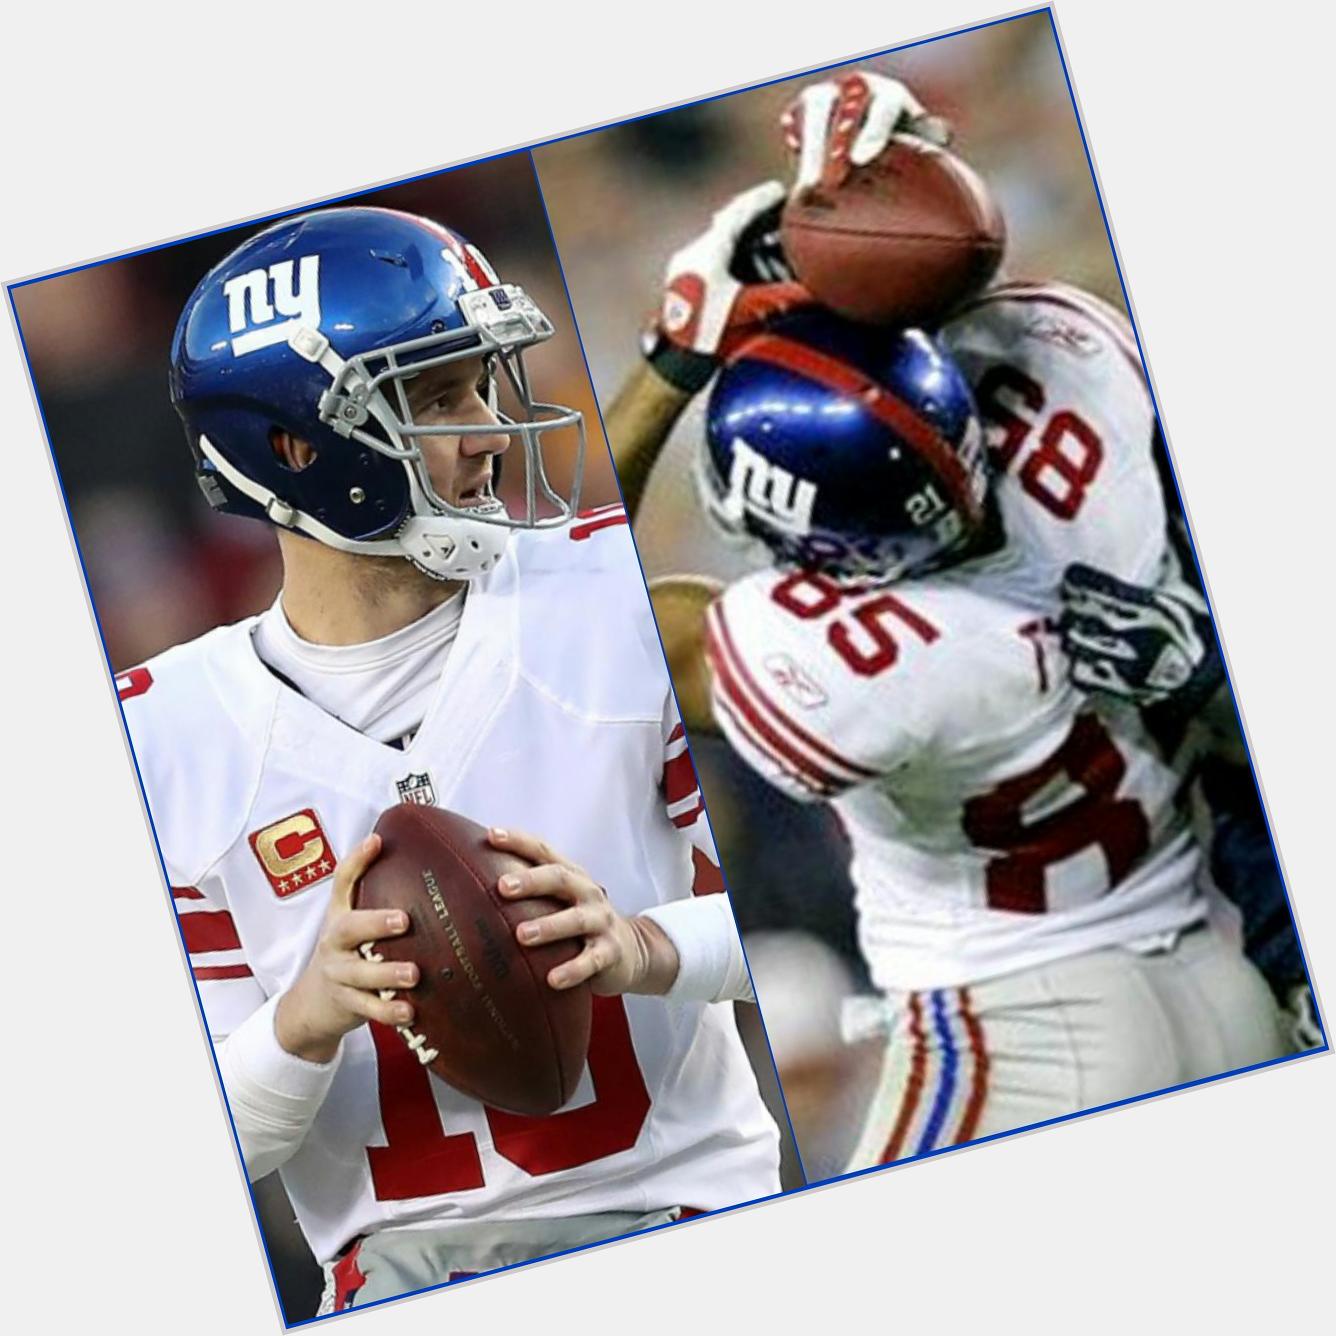   Happy Birthday to the TWO of you, Eli Manning & David Tyree!  